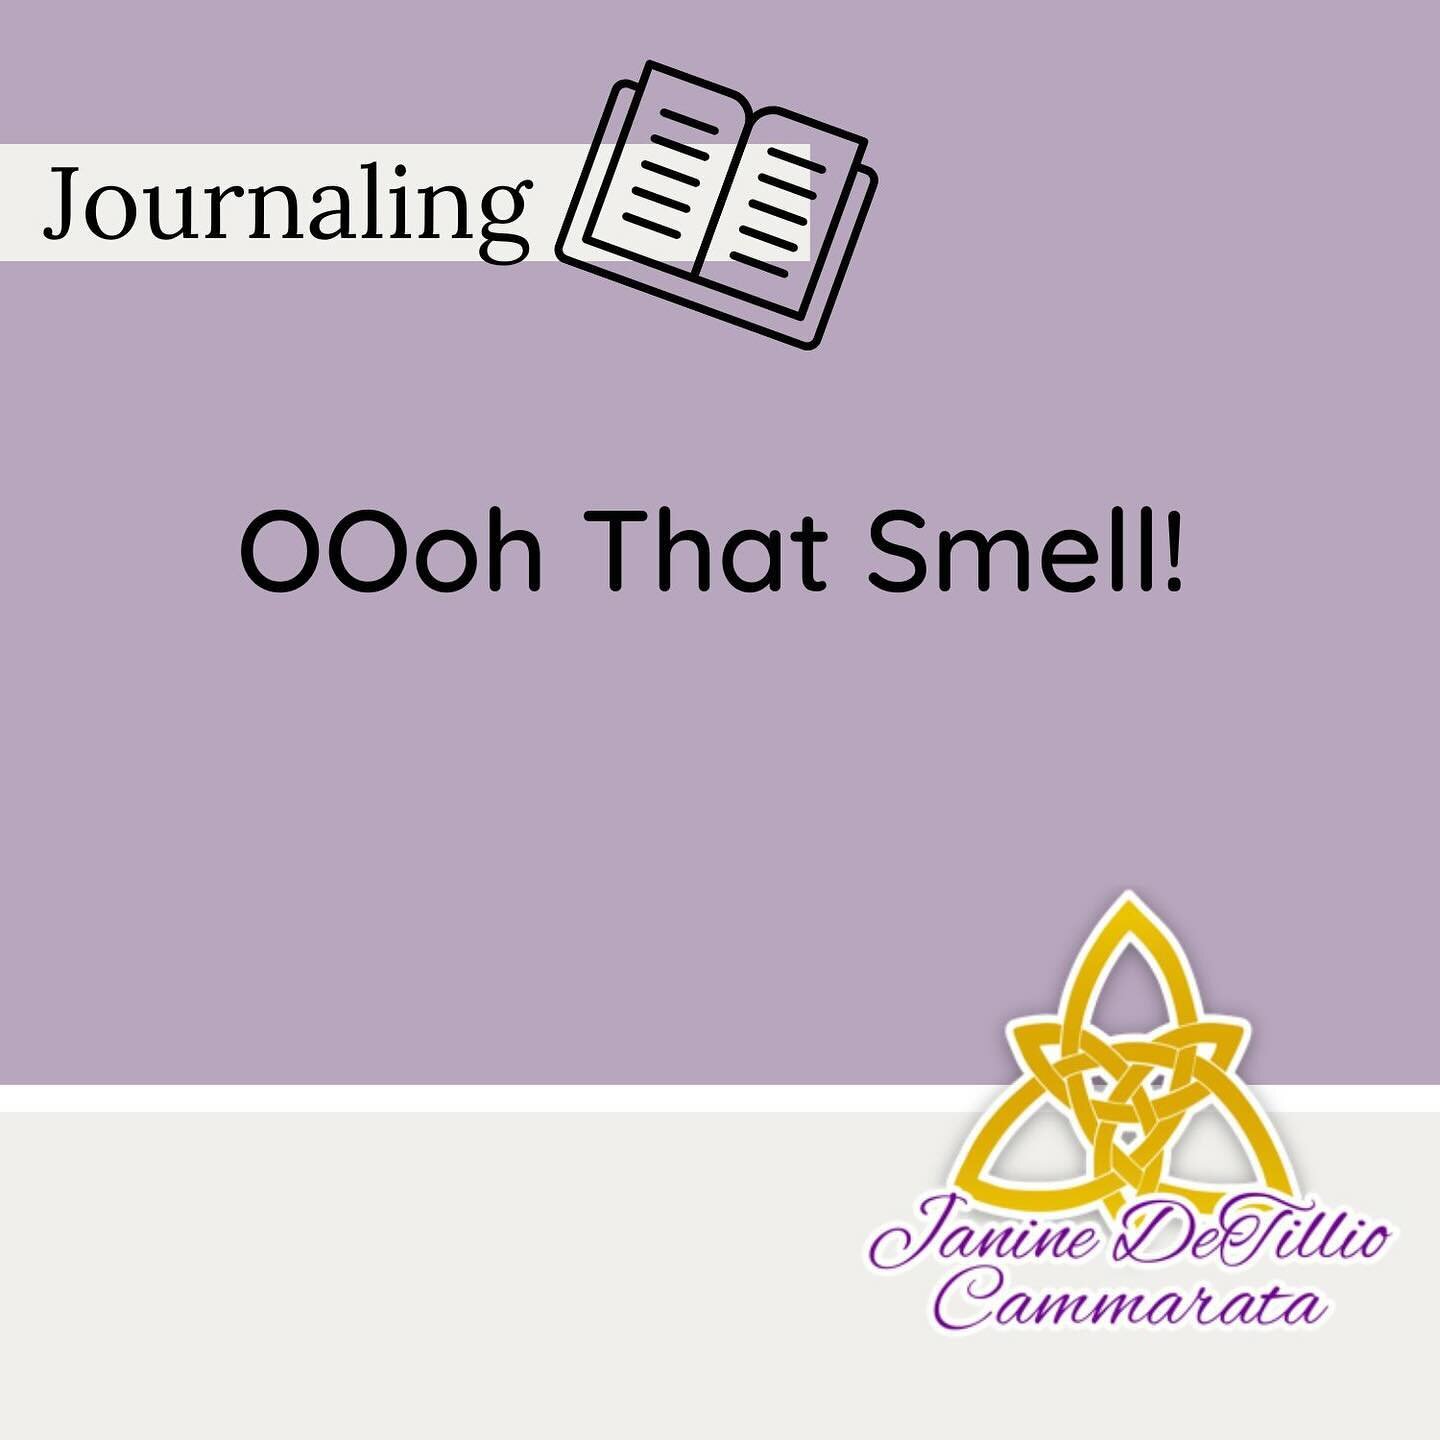 OOooh That Smell!!
How Scents Affect Us

Yesterday, as I waited in my doctor&rsquo;s office, I rubbed vanilla bean scented lotion on my dry hands. I breathed in the warm sugary scent and breathed out in relaxation. An older couple came into that area